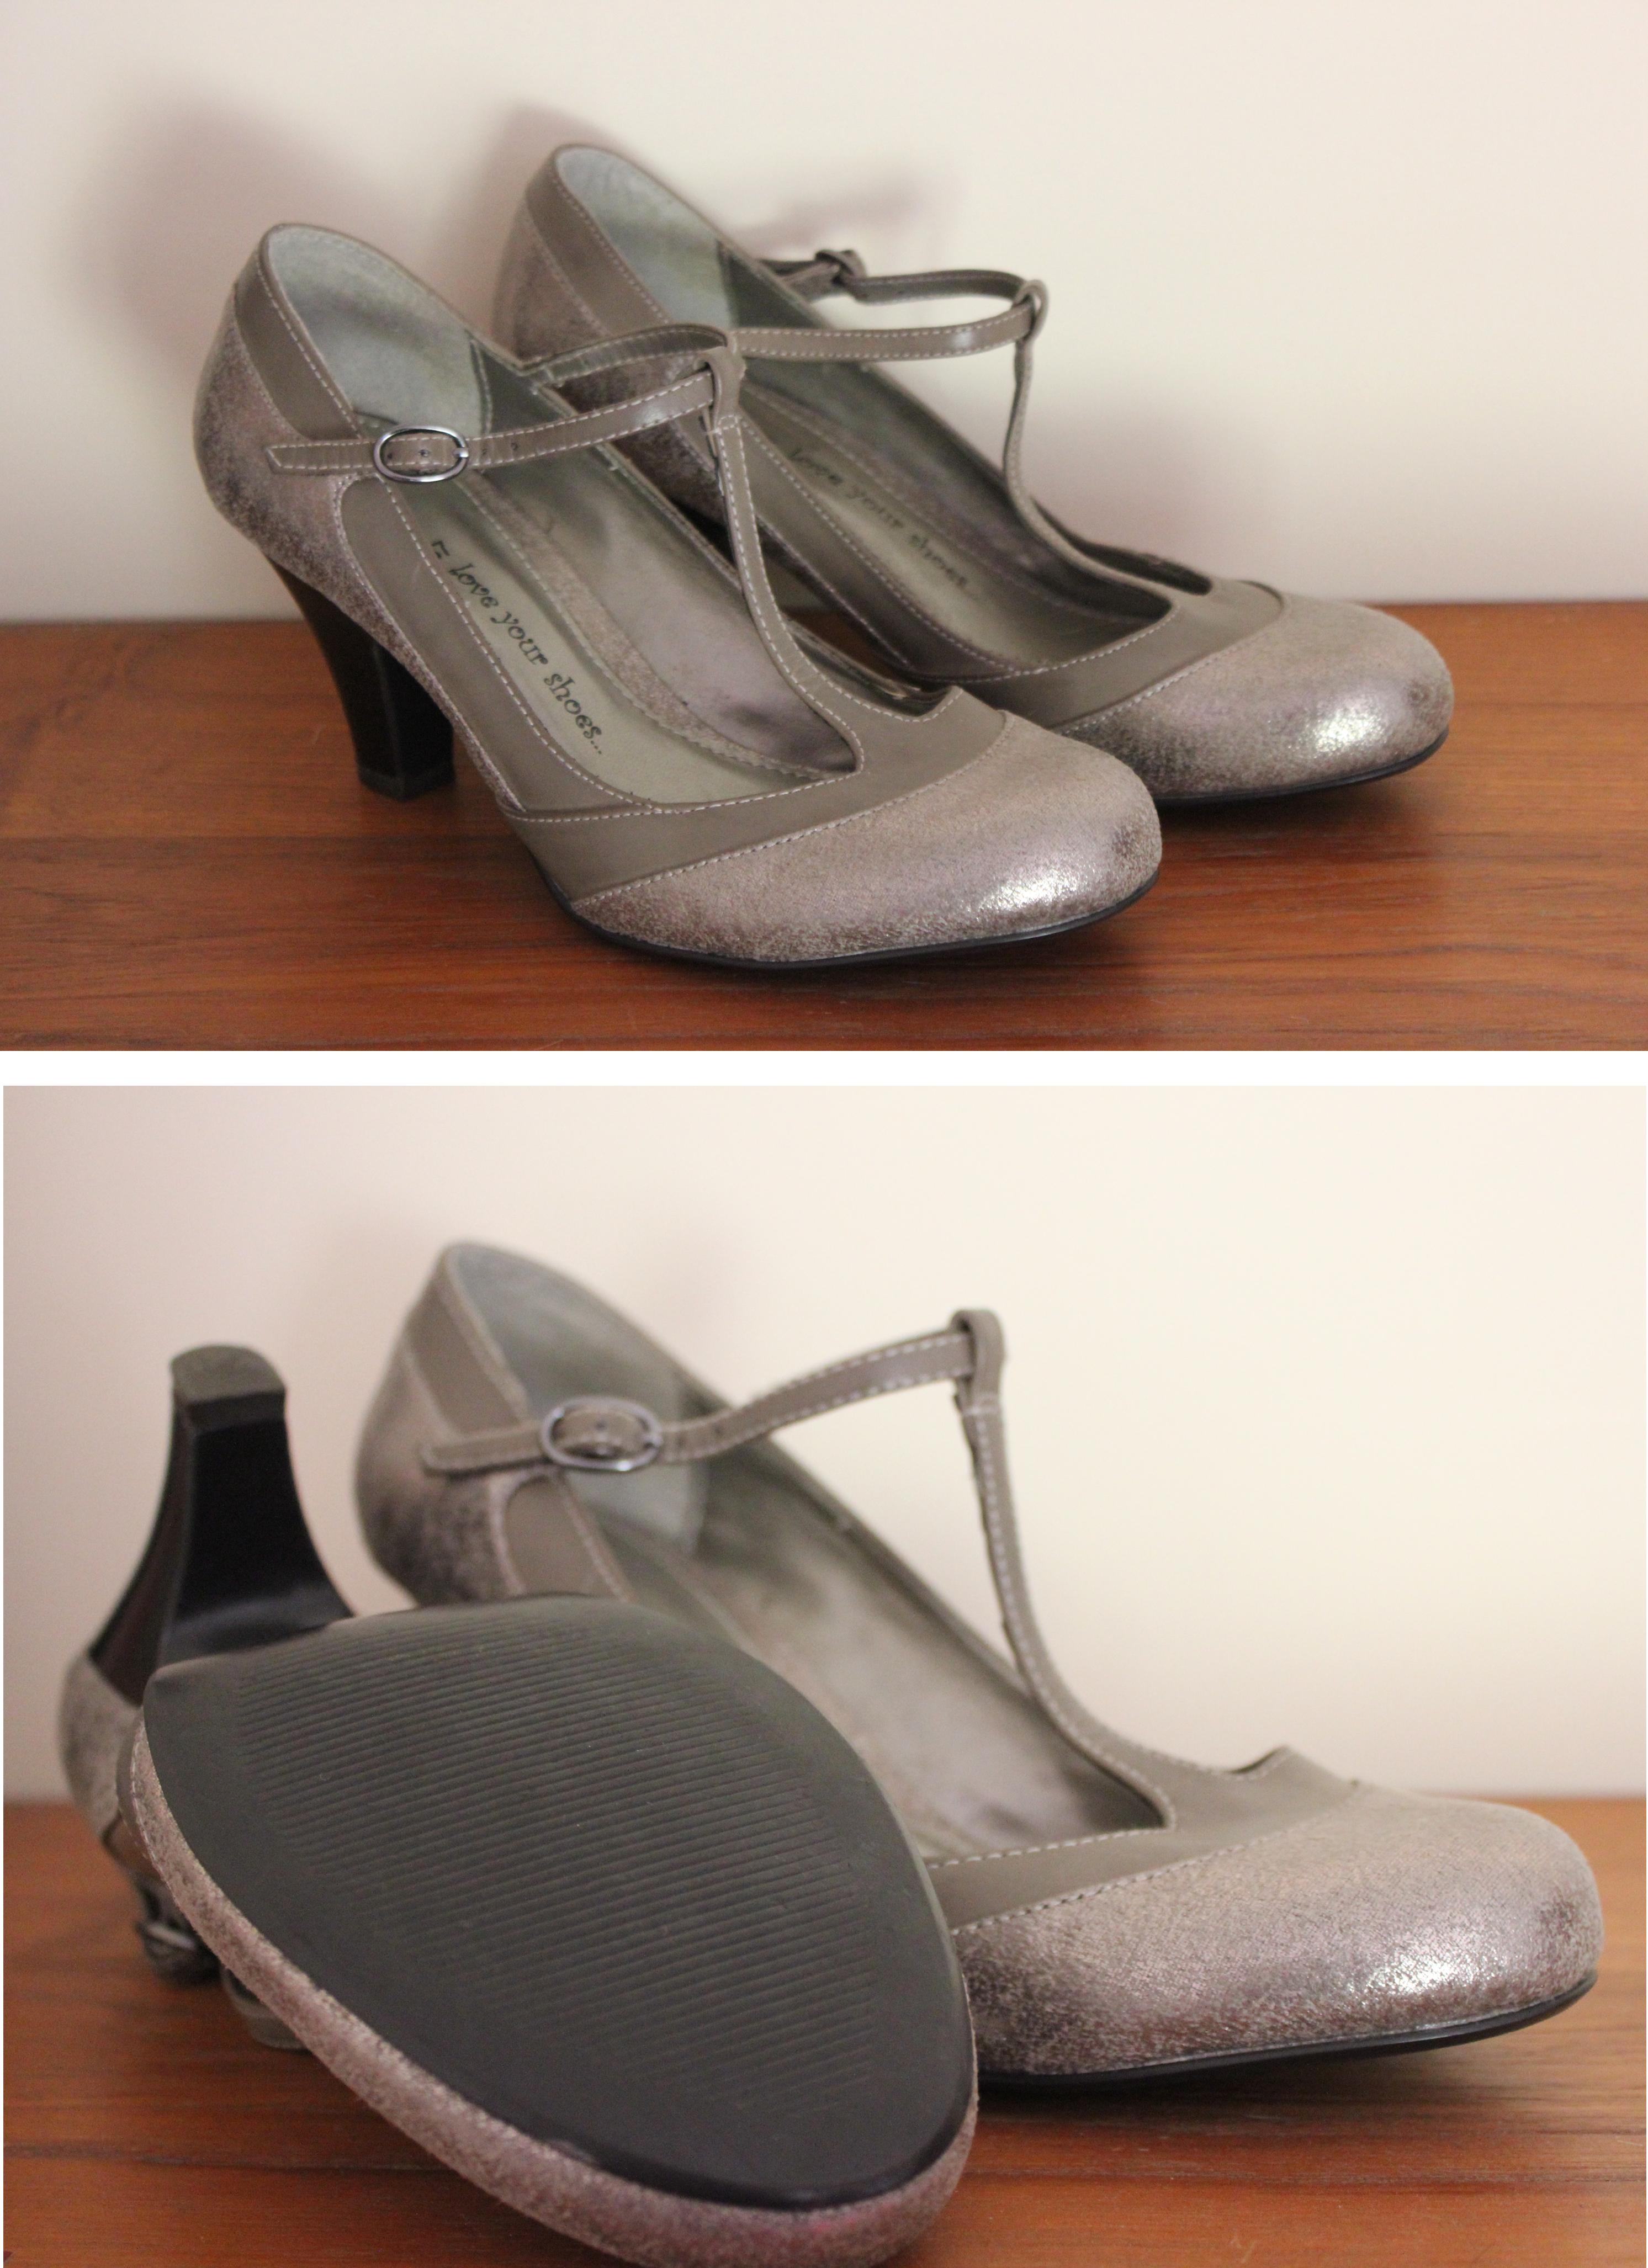 tuesday shoesday shoes from the car boot sale cassiefairys silver heels